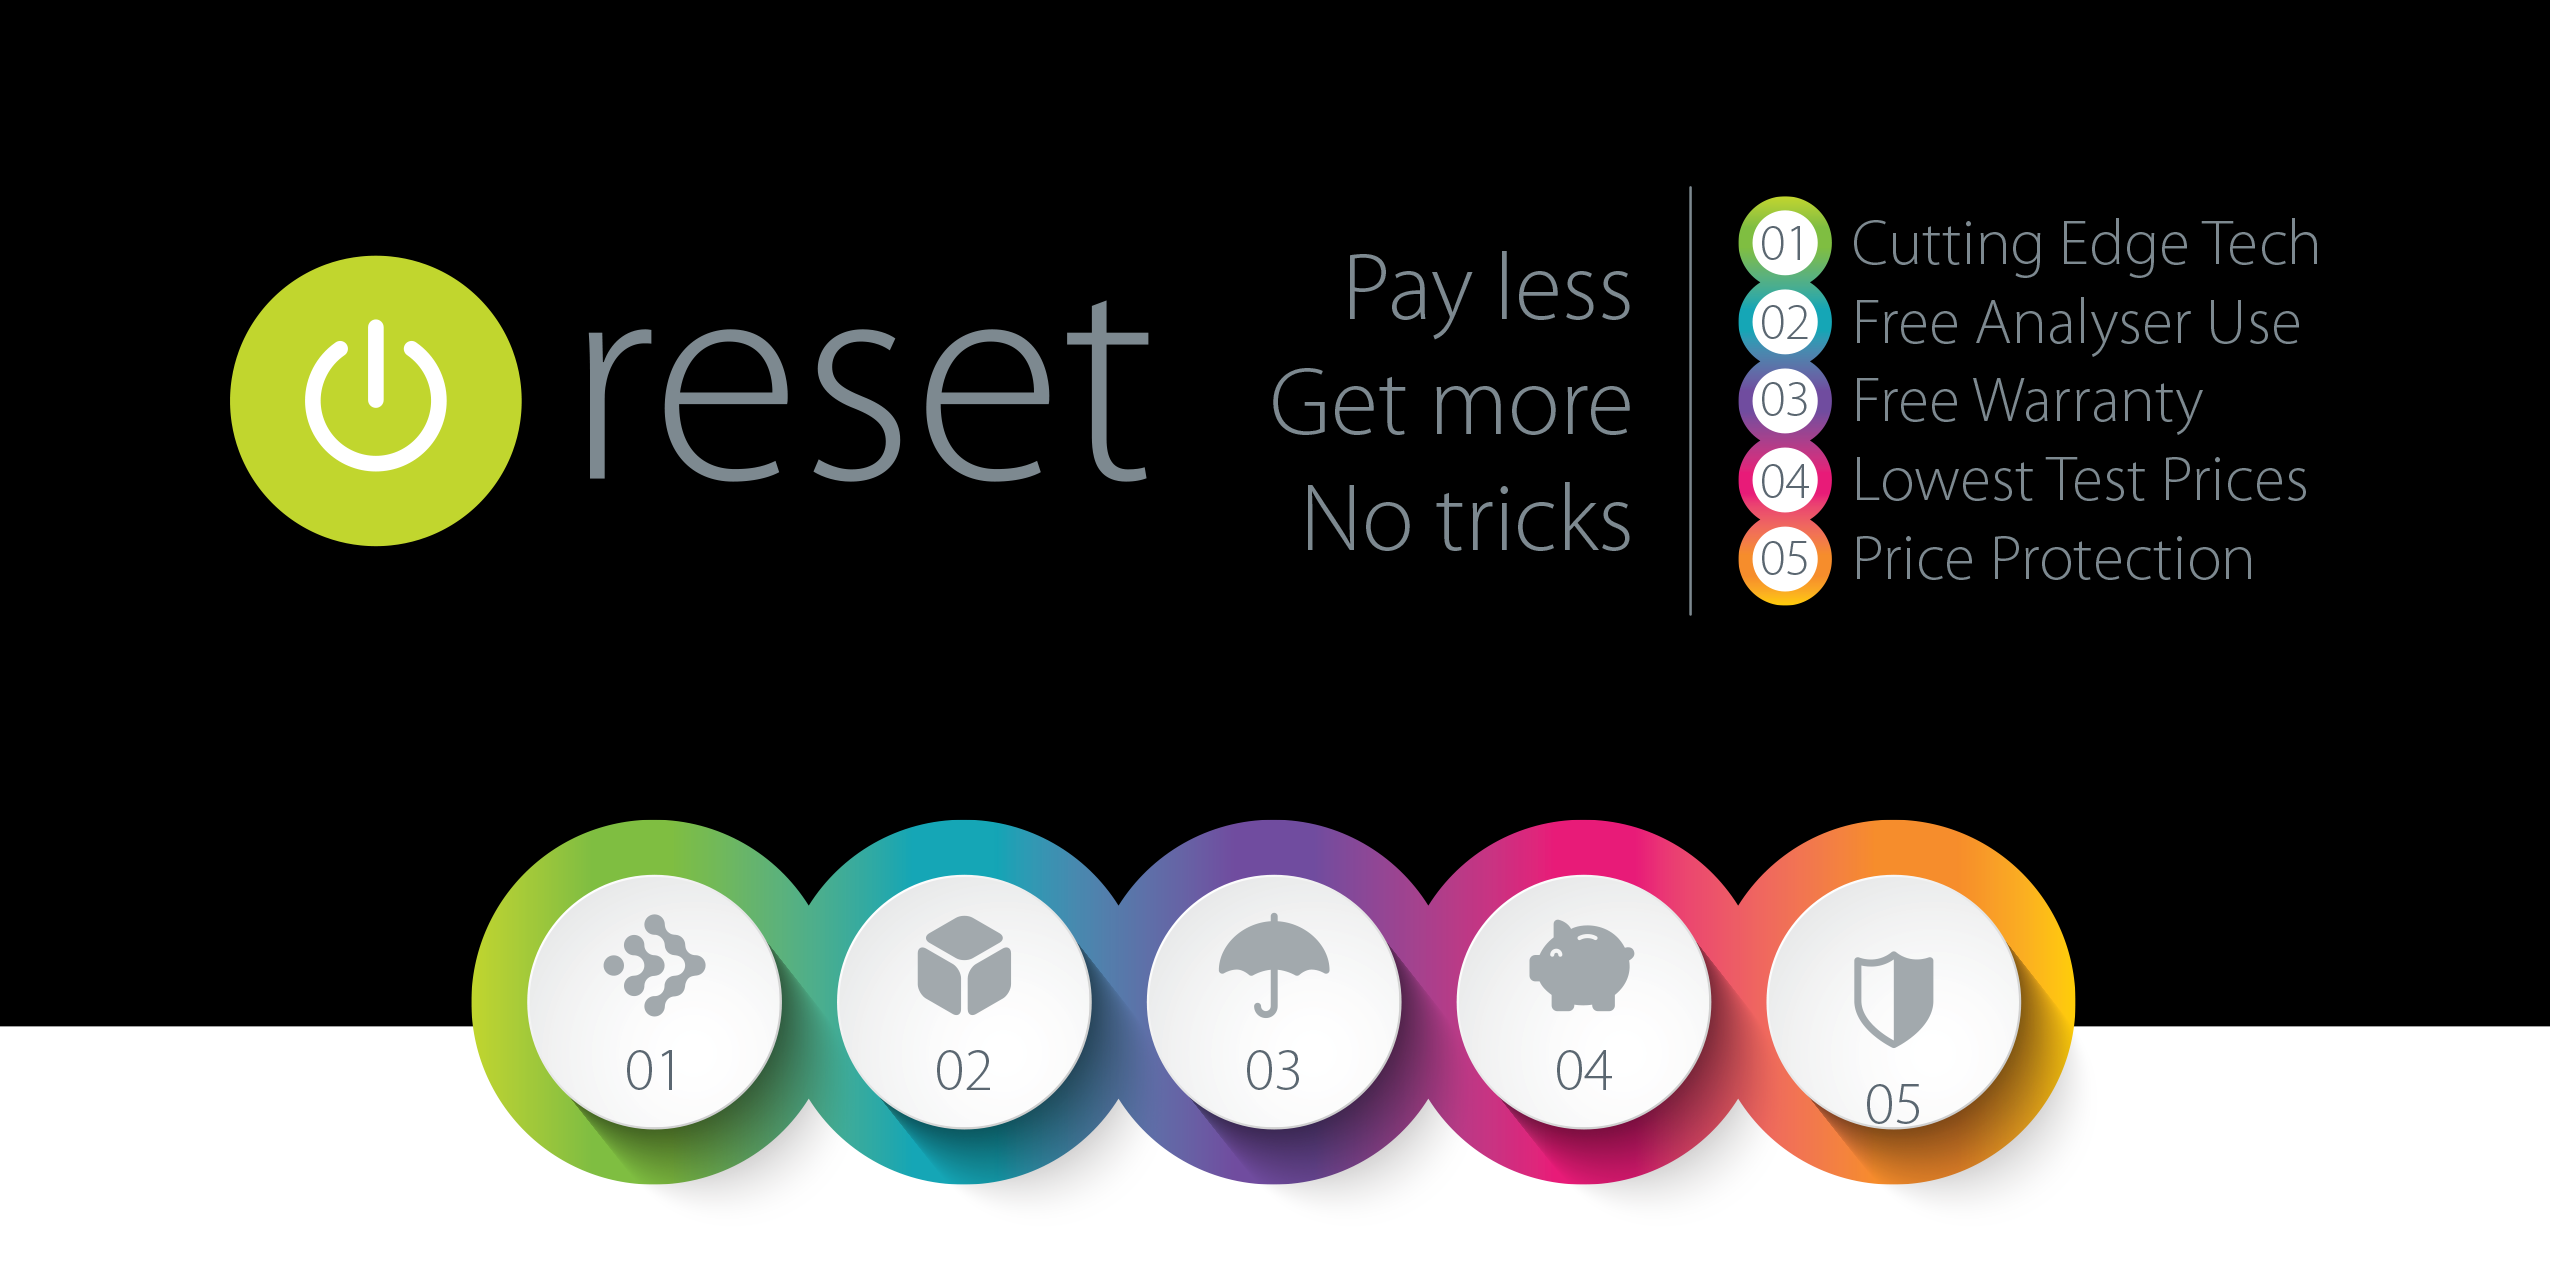 Reset. Pay less, get more, no tricks. Cutting edge tech, Free Analyser Use, Free Warranty, Lowest Test Pricing, Price Protection